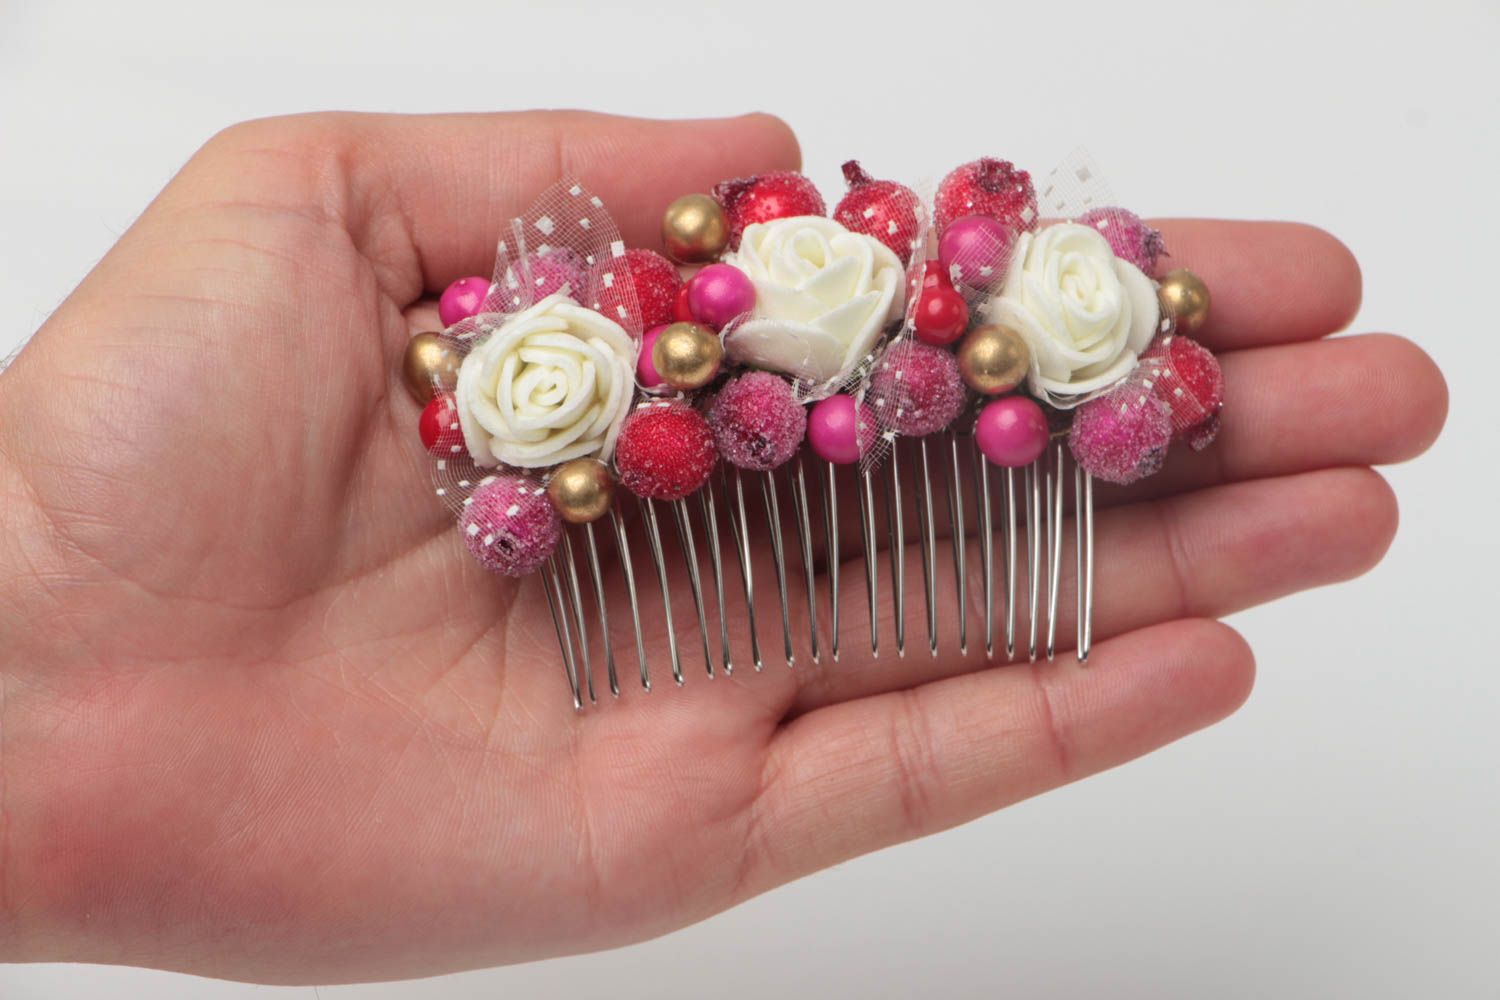 Handmade metal decorative hair comb with artificial colorful berries and flowers photo 5